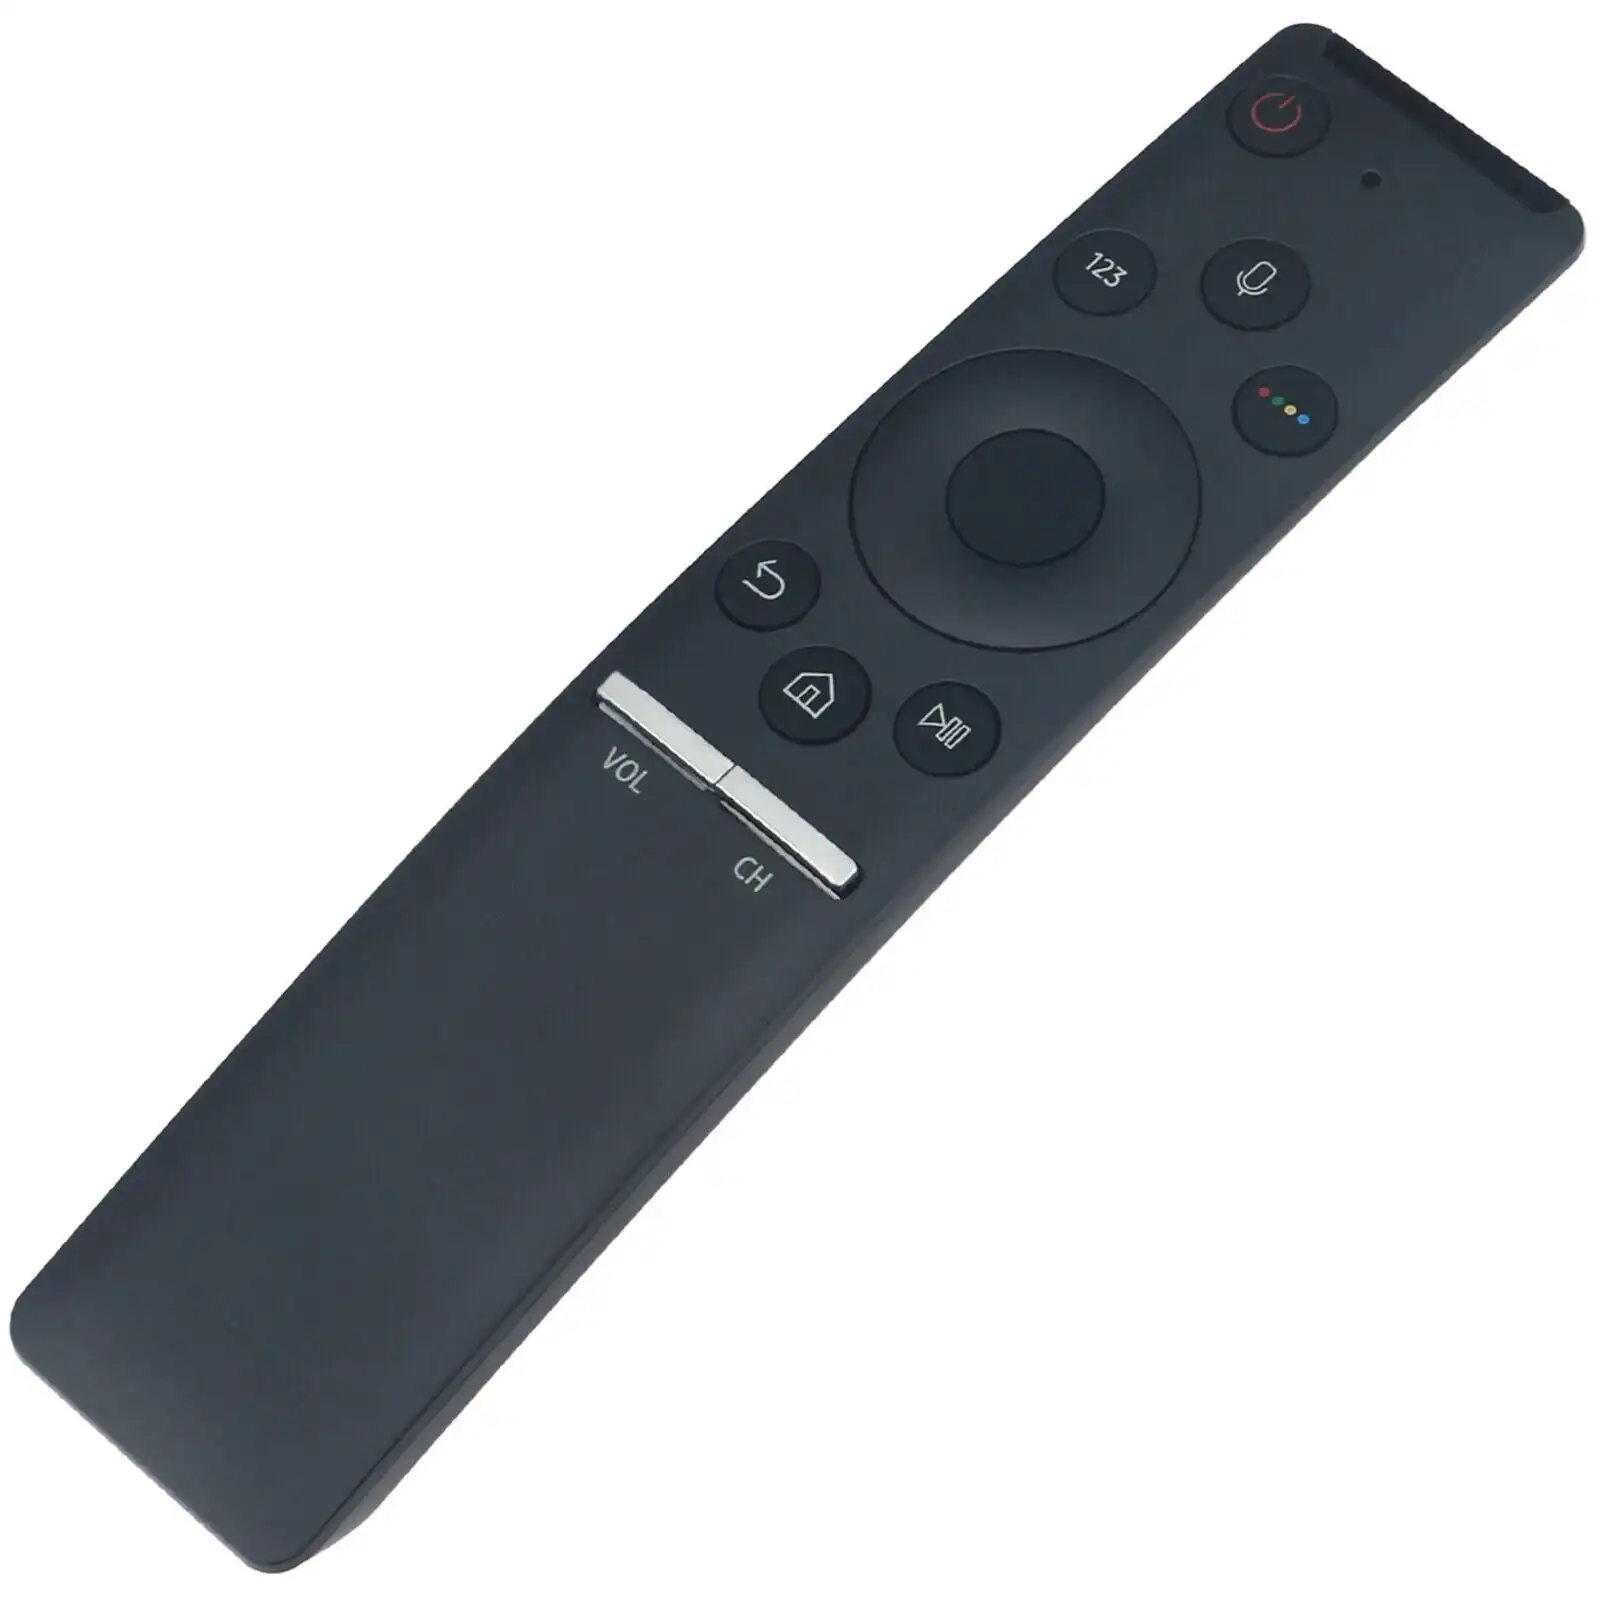 BN59-01389A Remote For Samsung TV Remote Control with Voice